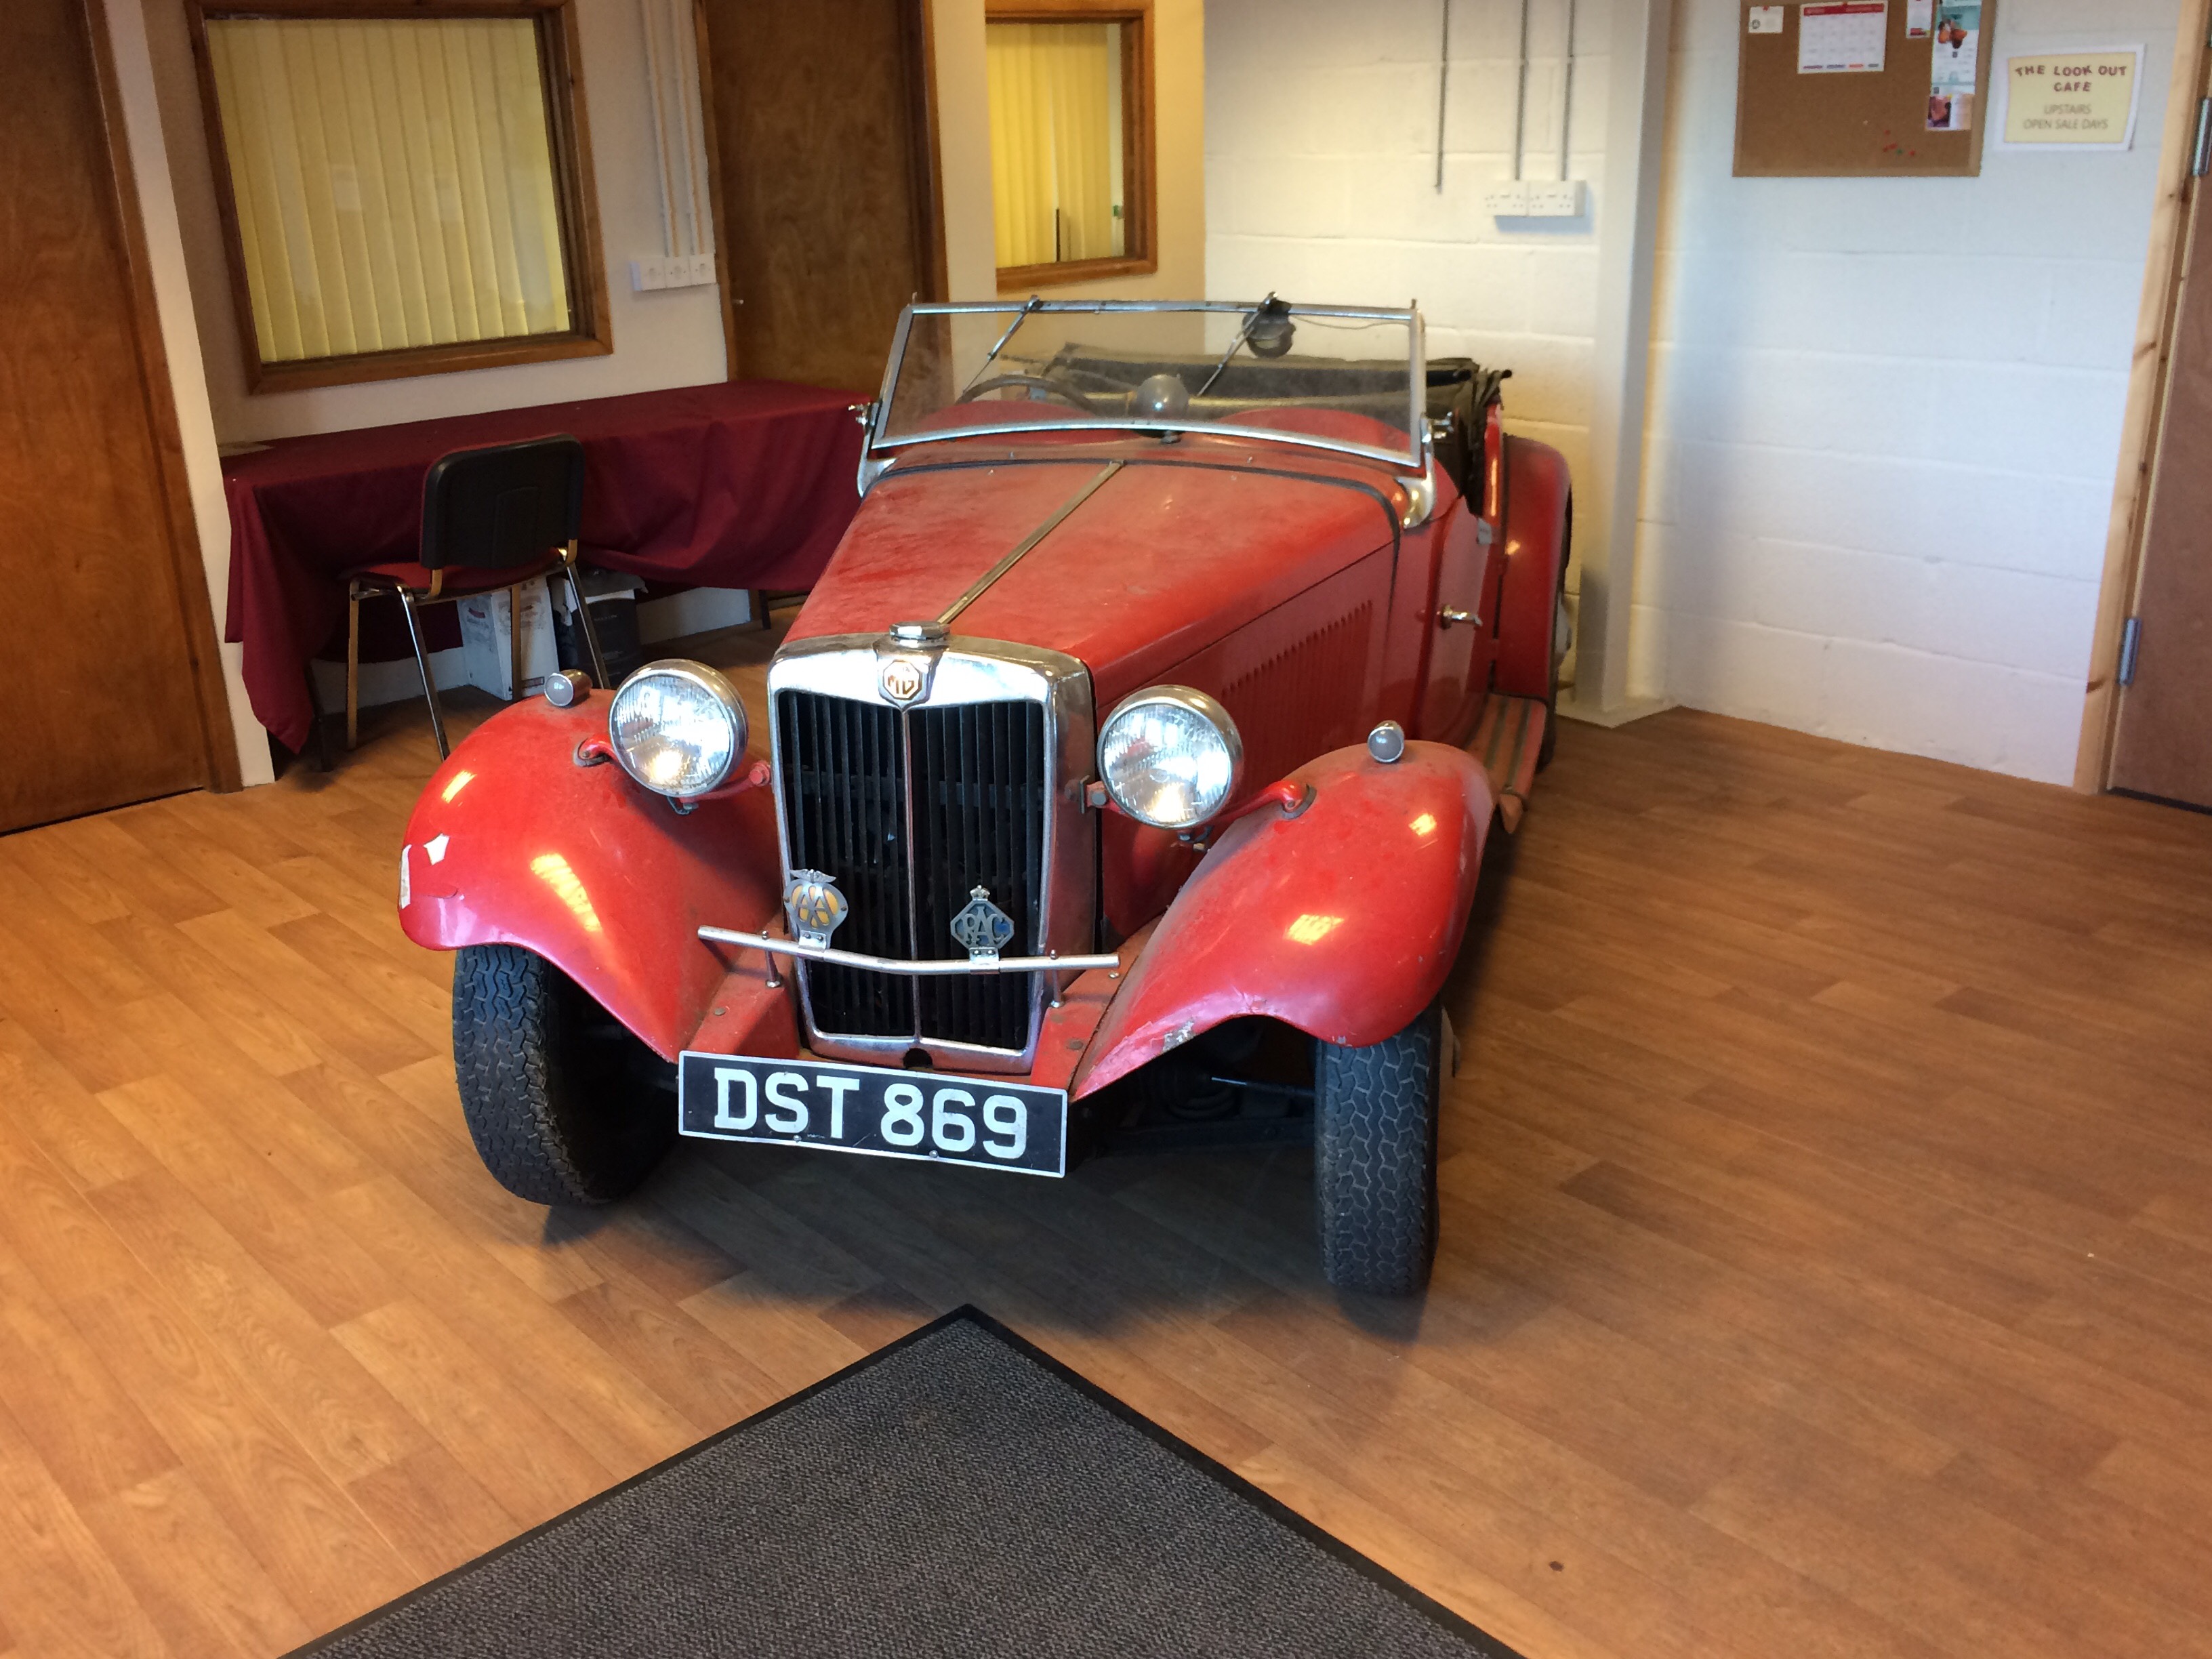 A 1950 MGTD Special, registration number DST 869, red. - Image 2 of 2